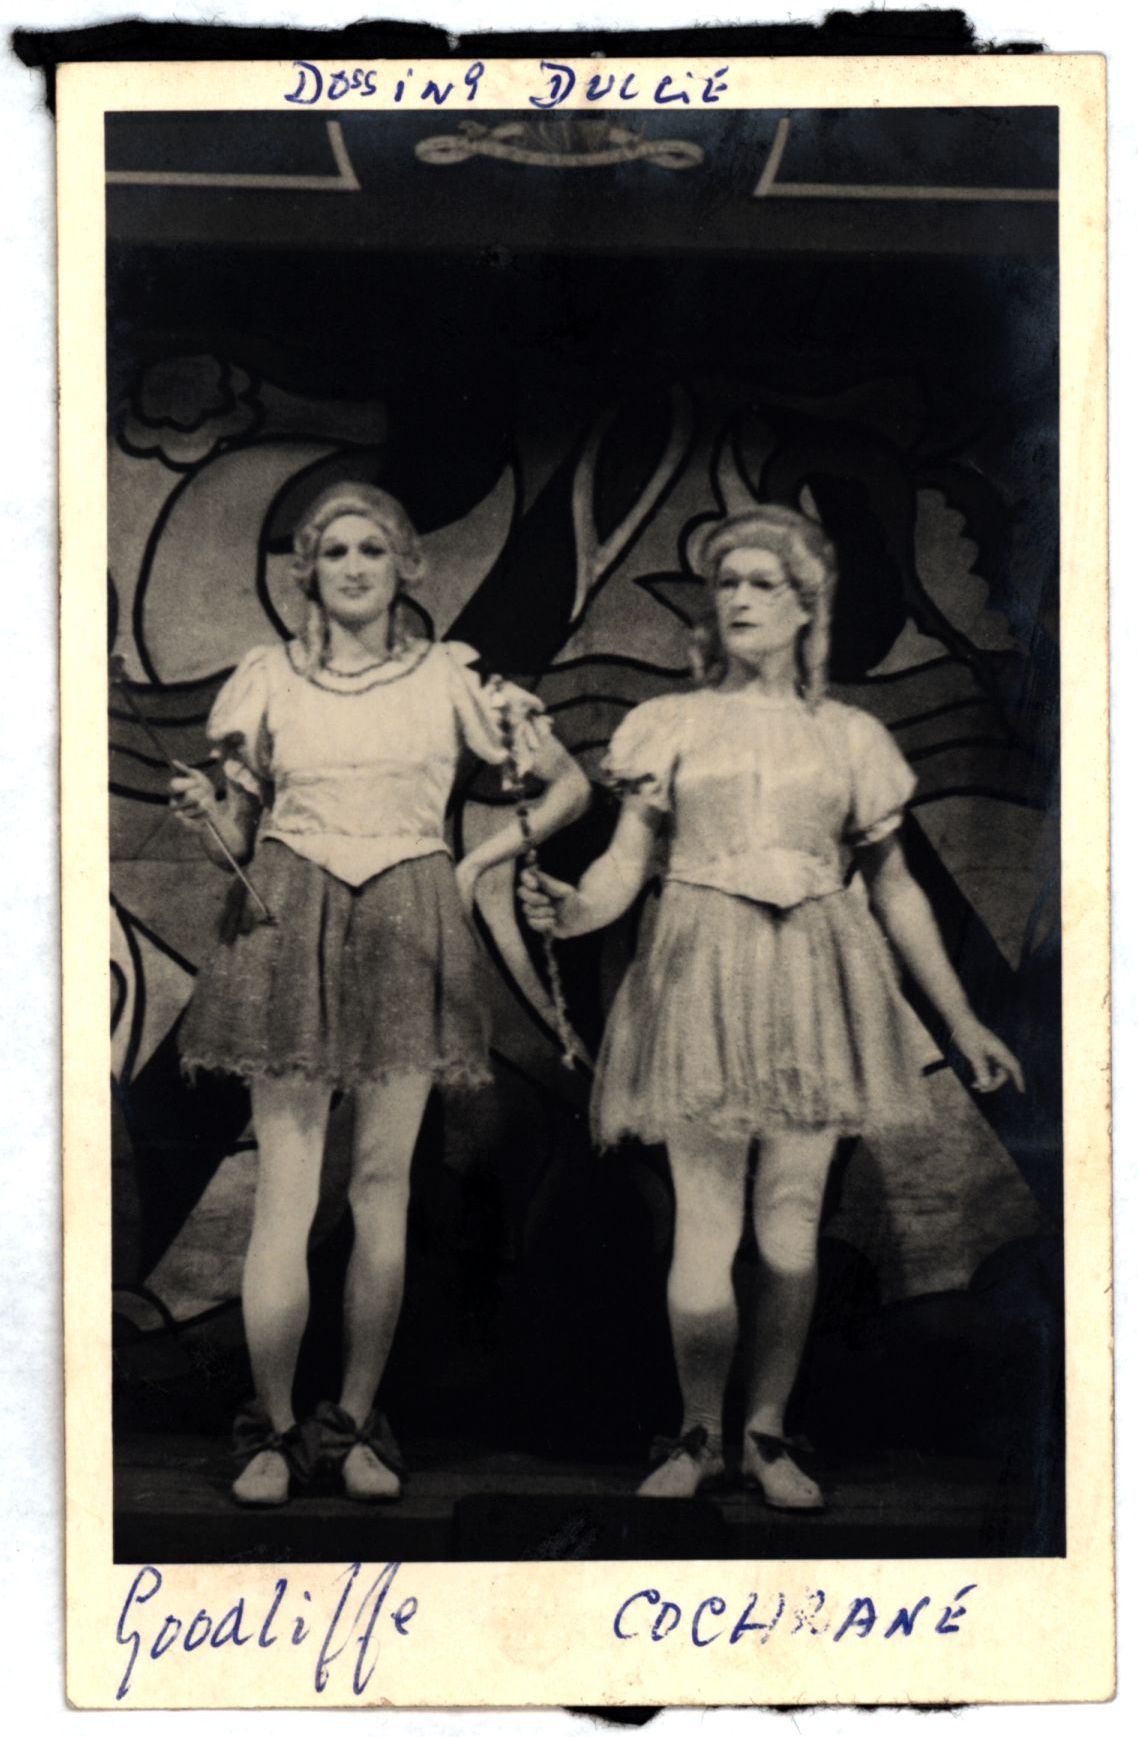 The pantomime Dossing Dulcie, with Michael Goodliffe (left) as an Immoral Fairy and Brodie Cochrane (right) as a Moral Fairy